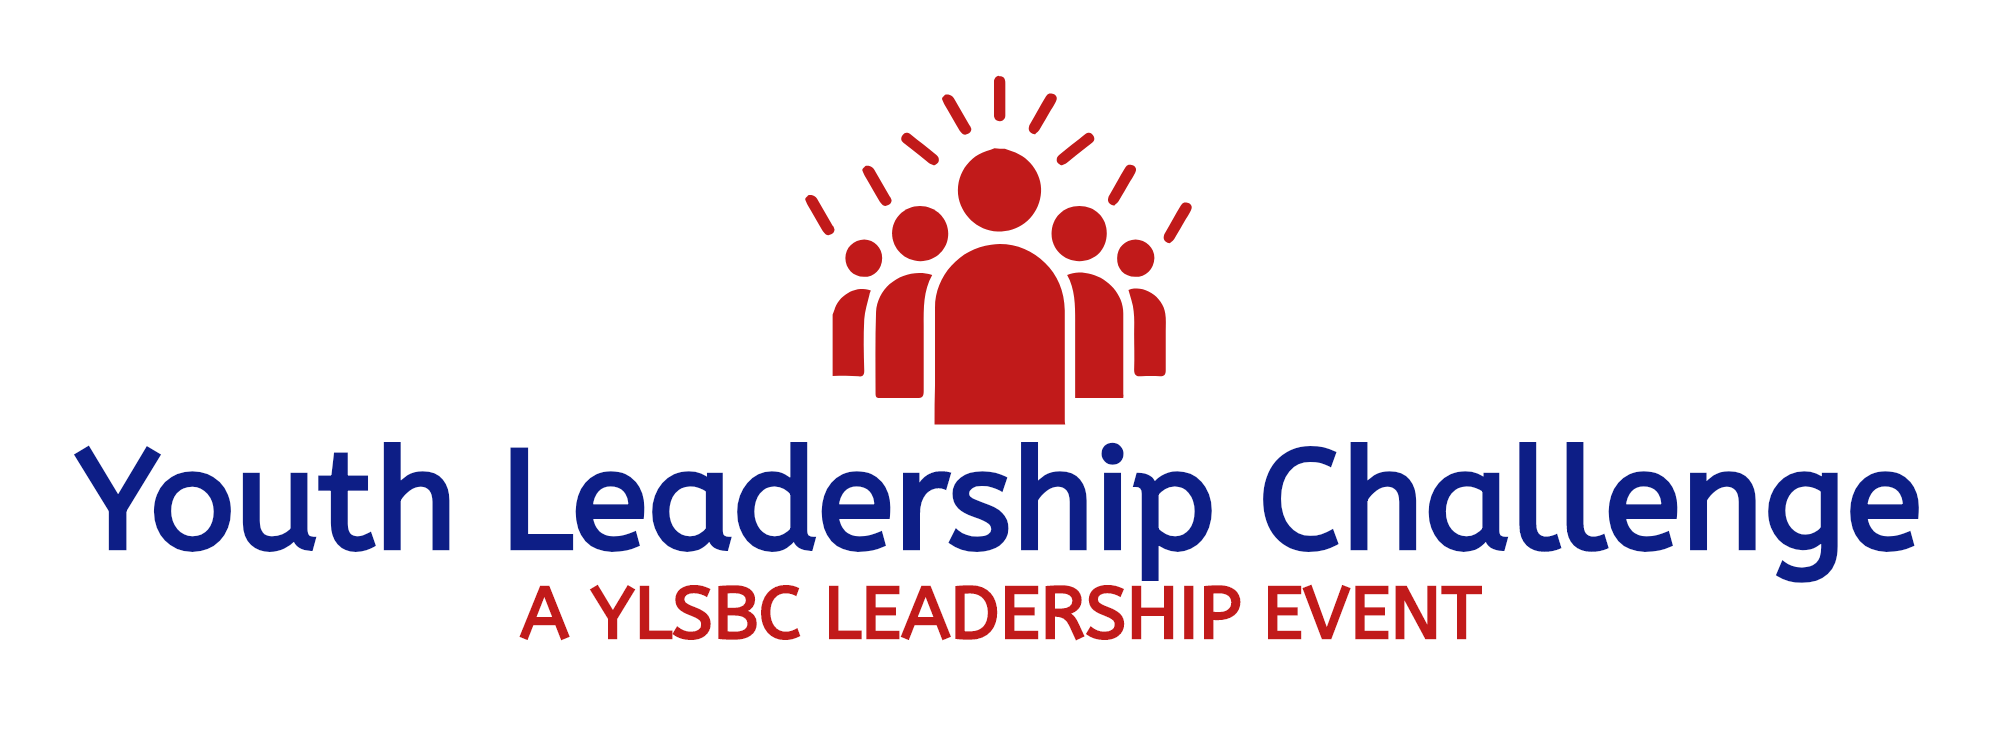 Youth Leadership Challenge logo final.png